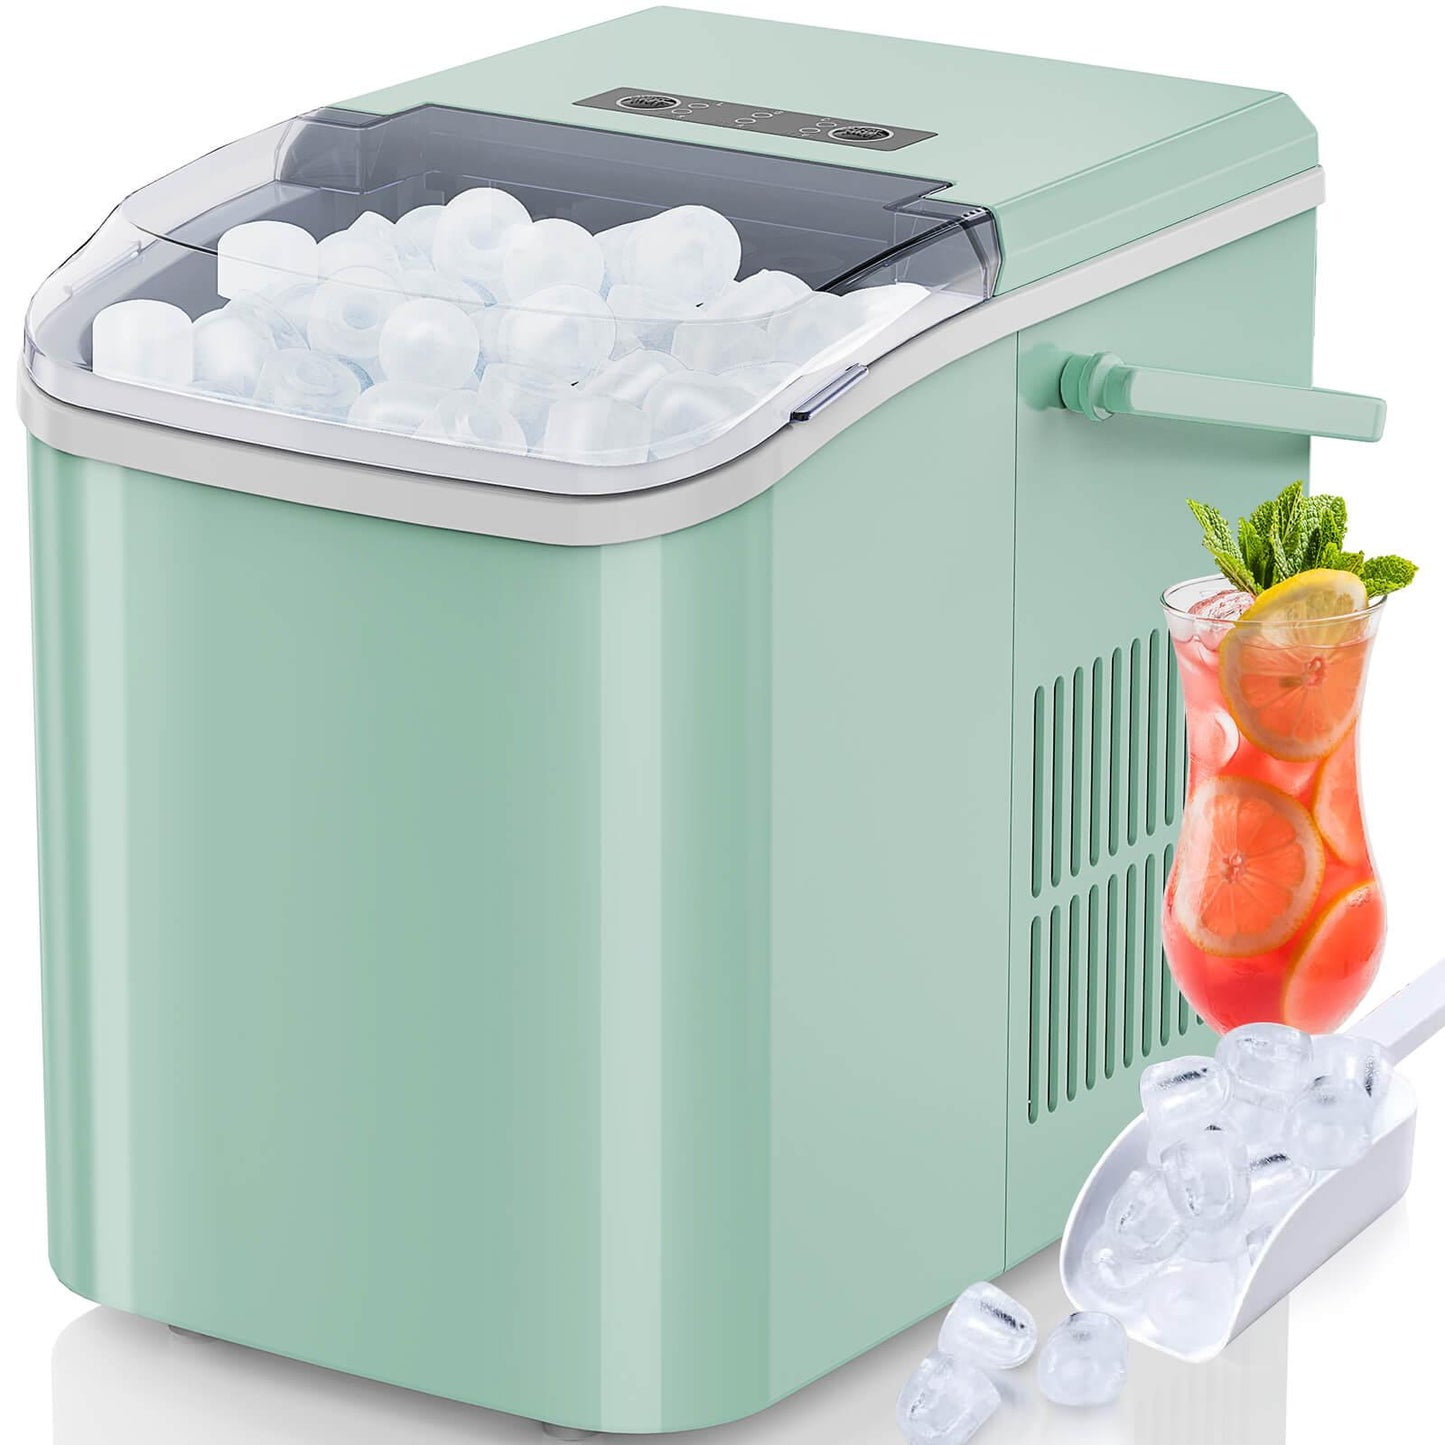 Portable Countertop Ice Maker with Self-Cleaning Functio